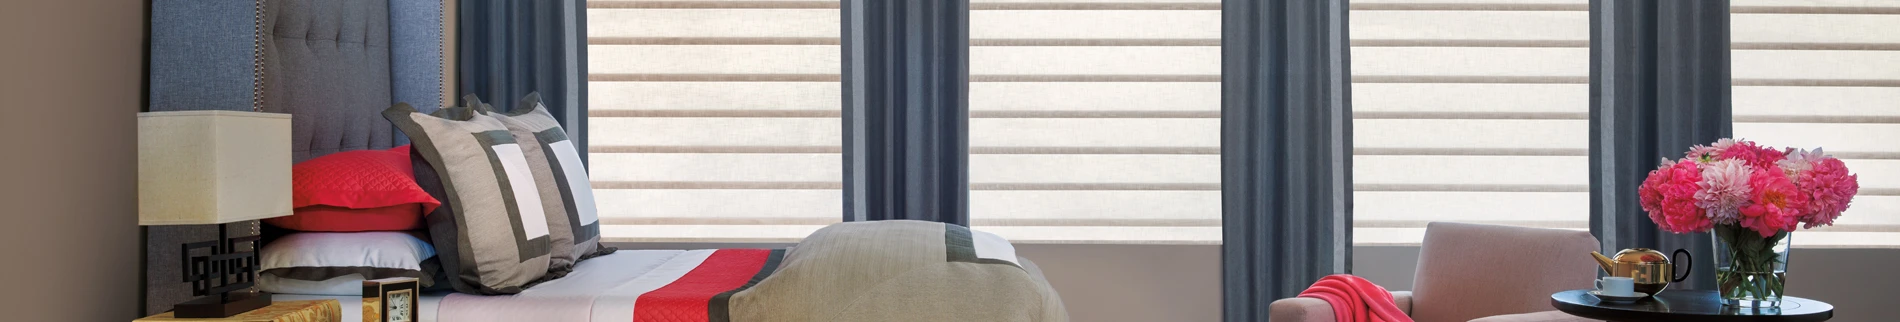 Hunter Douglas Window treatments with blue curtains.